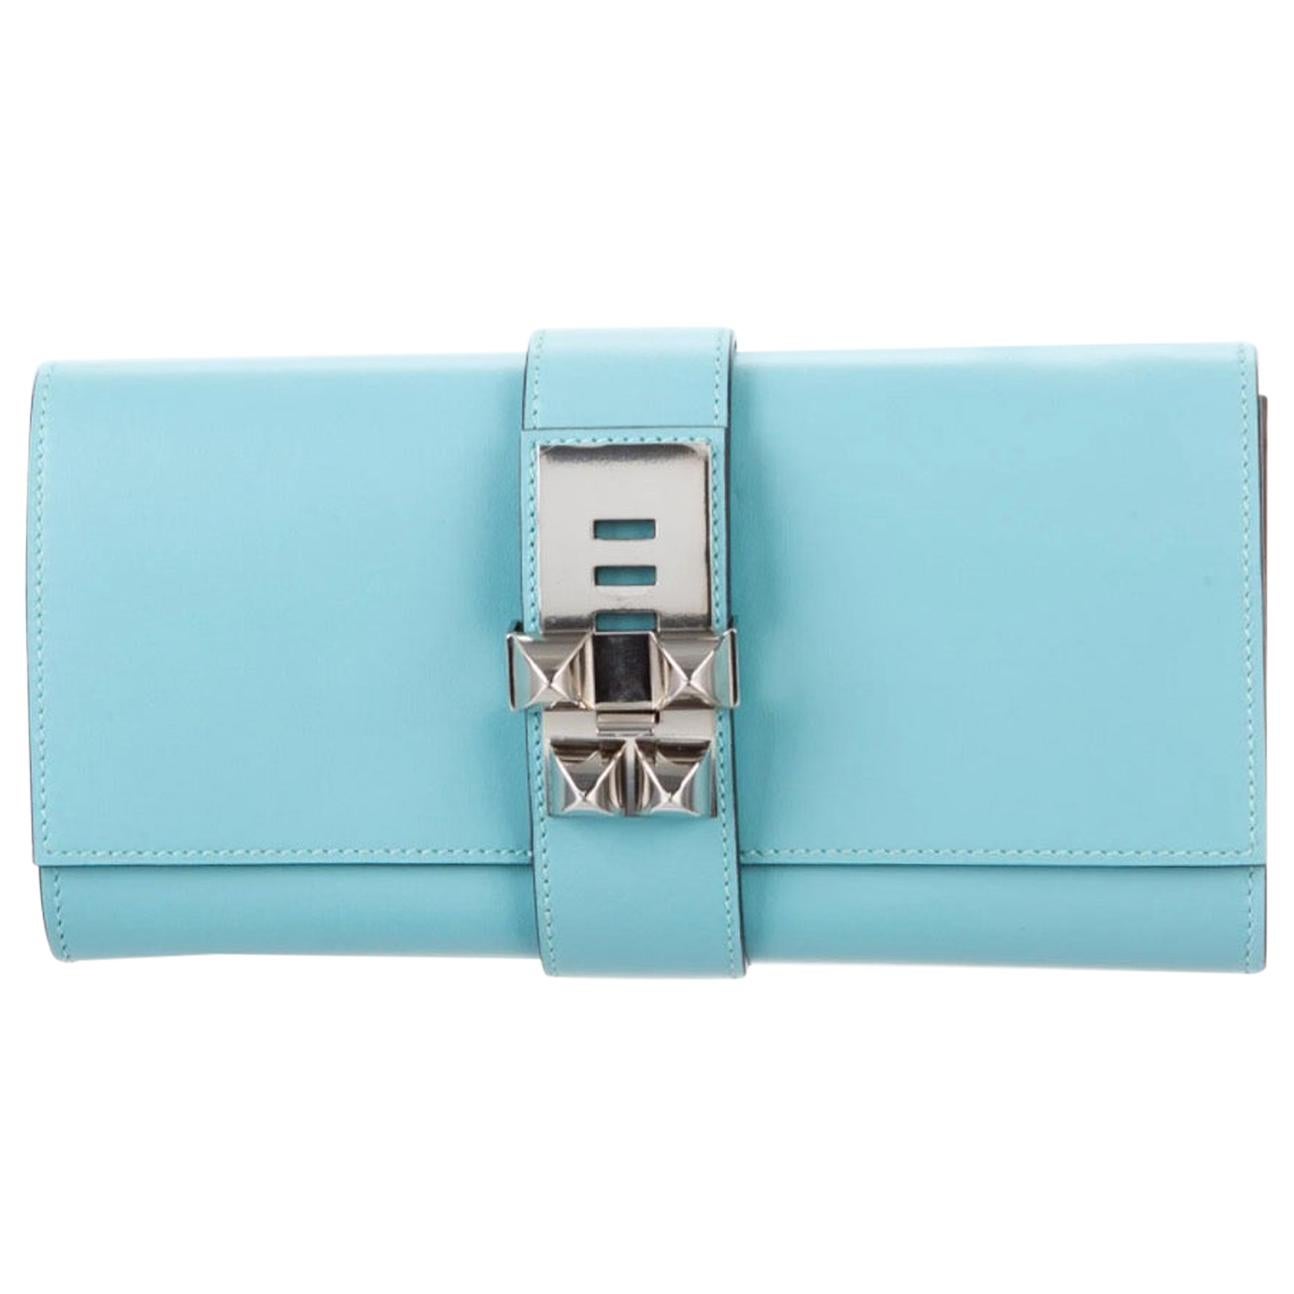 Hermes NEW Tiffany Baby Blue Leather Palladium Evening Clutch Flap Bag in Box